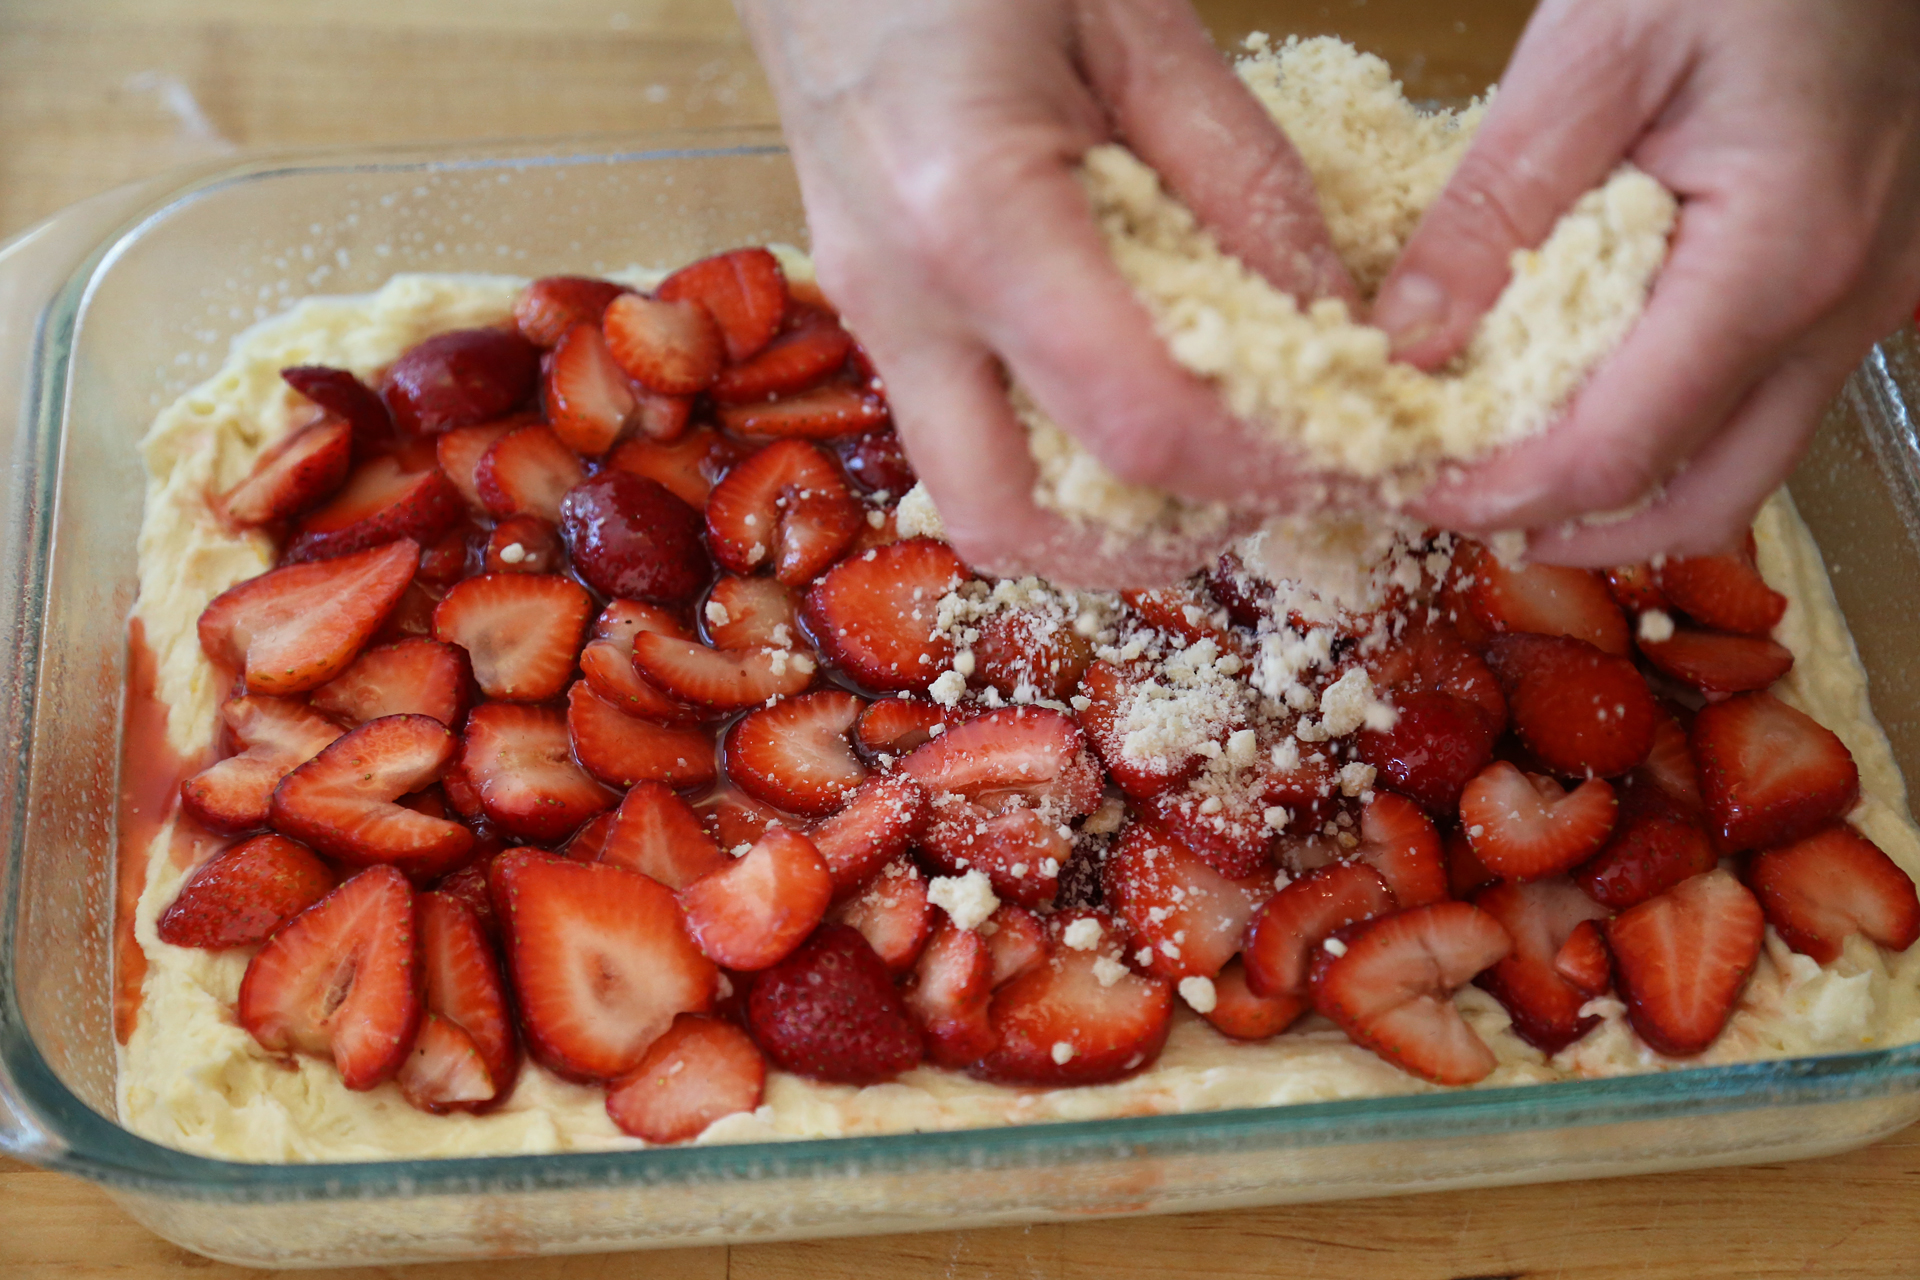 Sprinkle the streusel evenly over the strawberries.